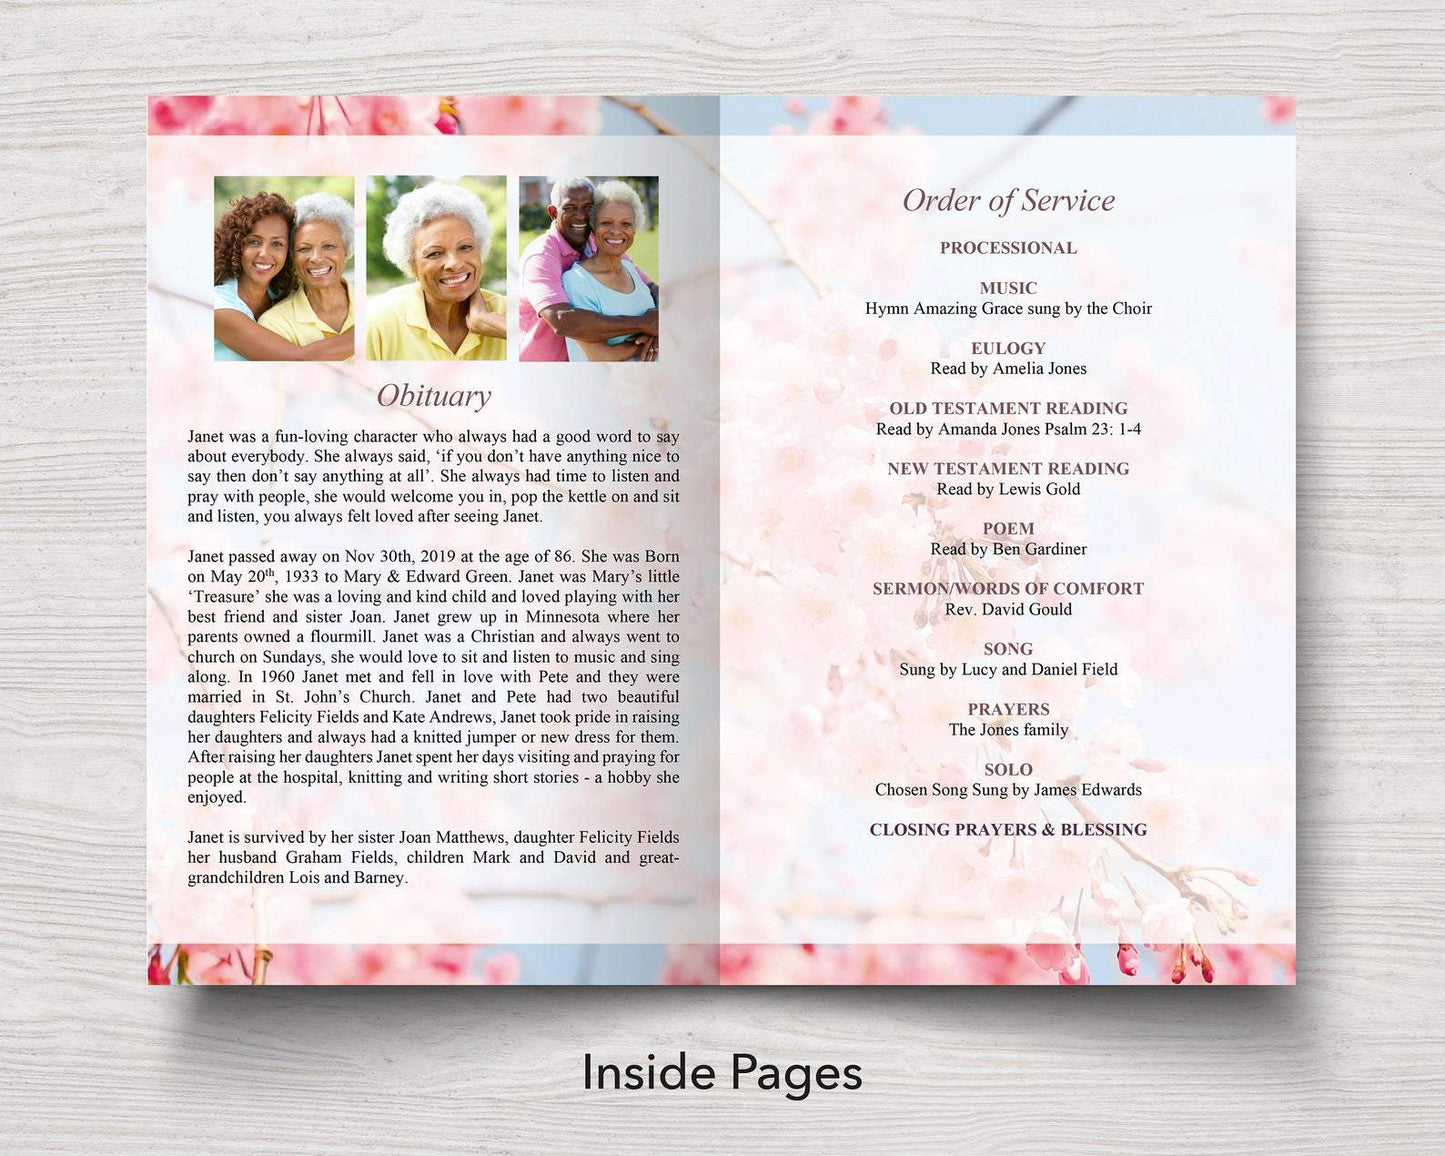 4 Page Cherry Blossom Funeral Program Template